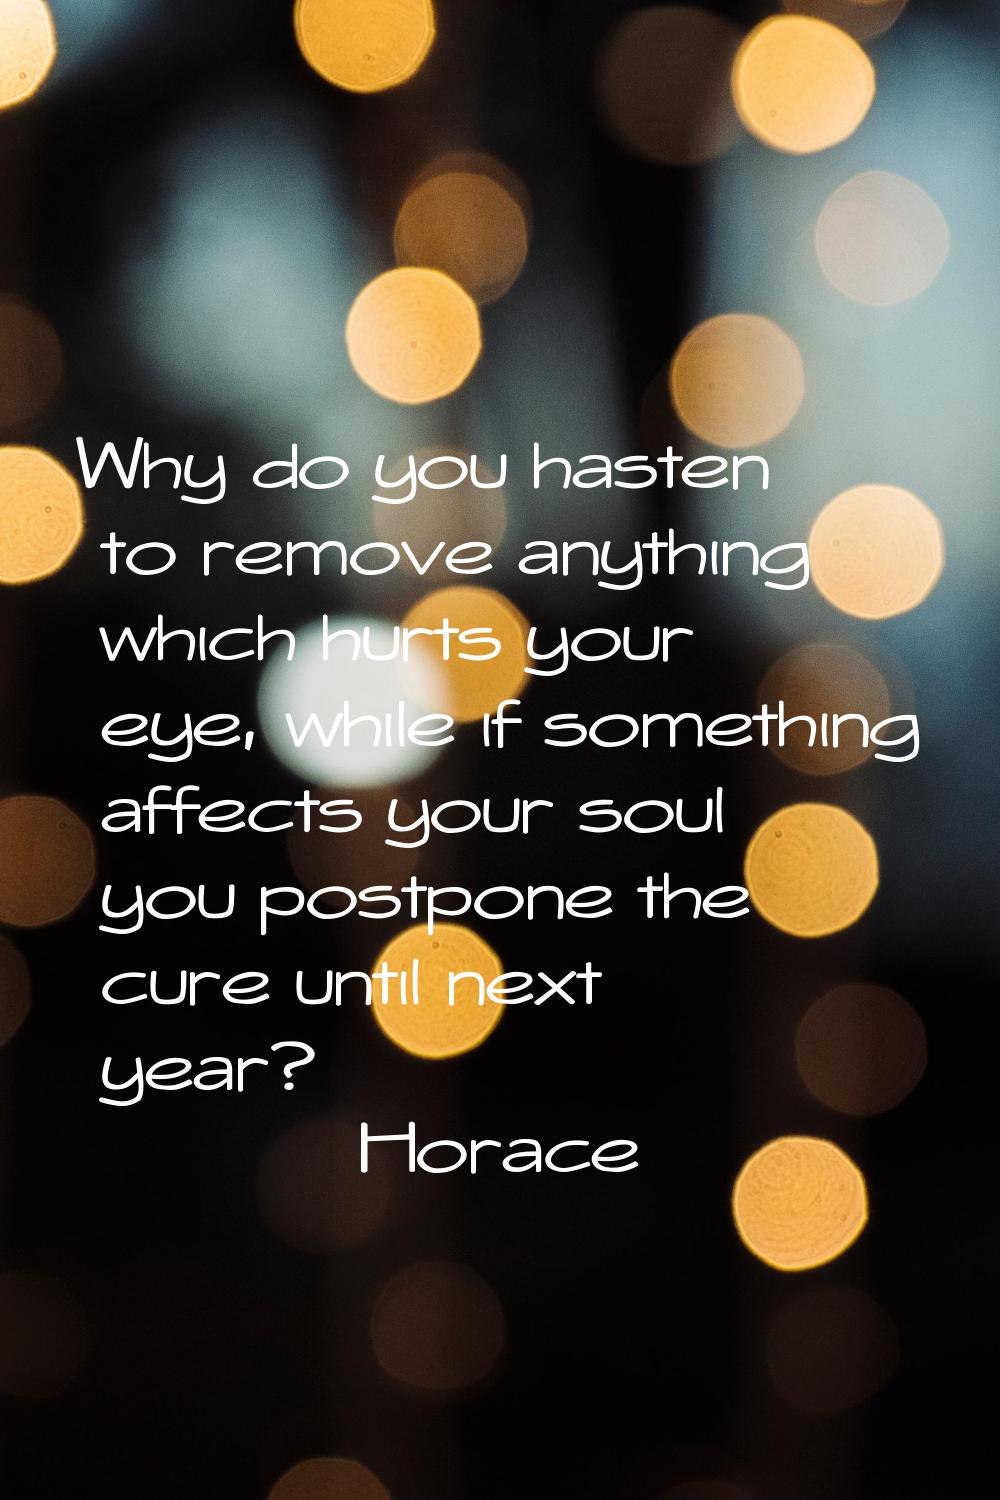 Why do you hasten to remove anything which hurts your eye, while if something affects your soul you